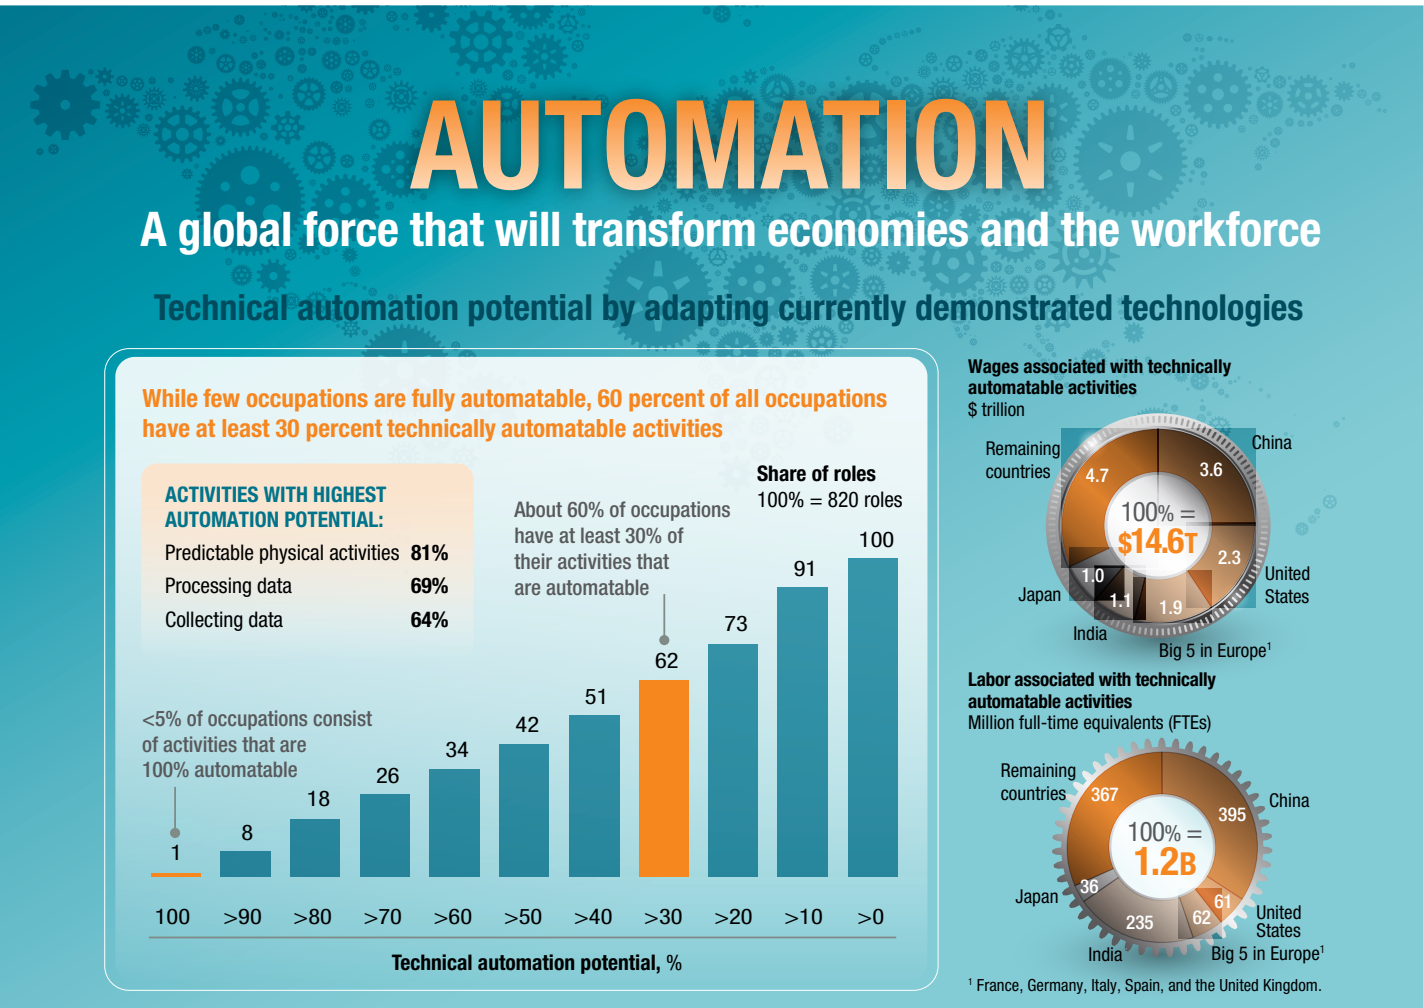 McKinsey Global Institute Infographic on Automation